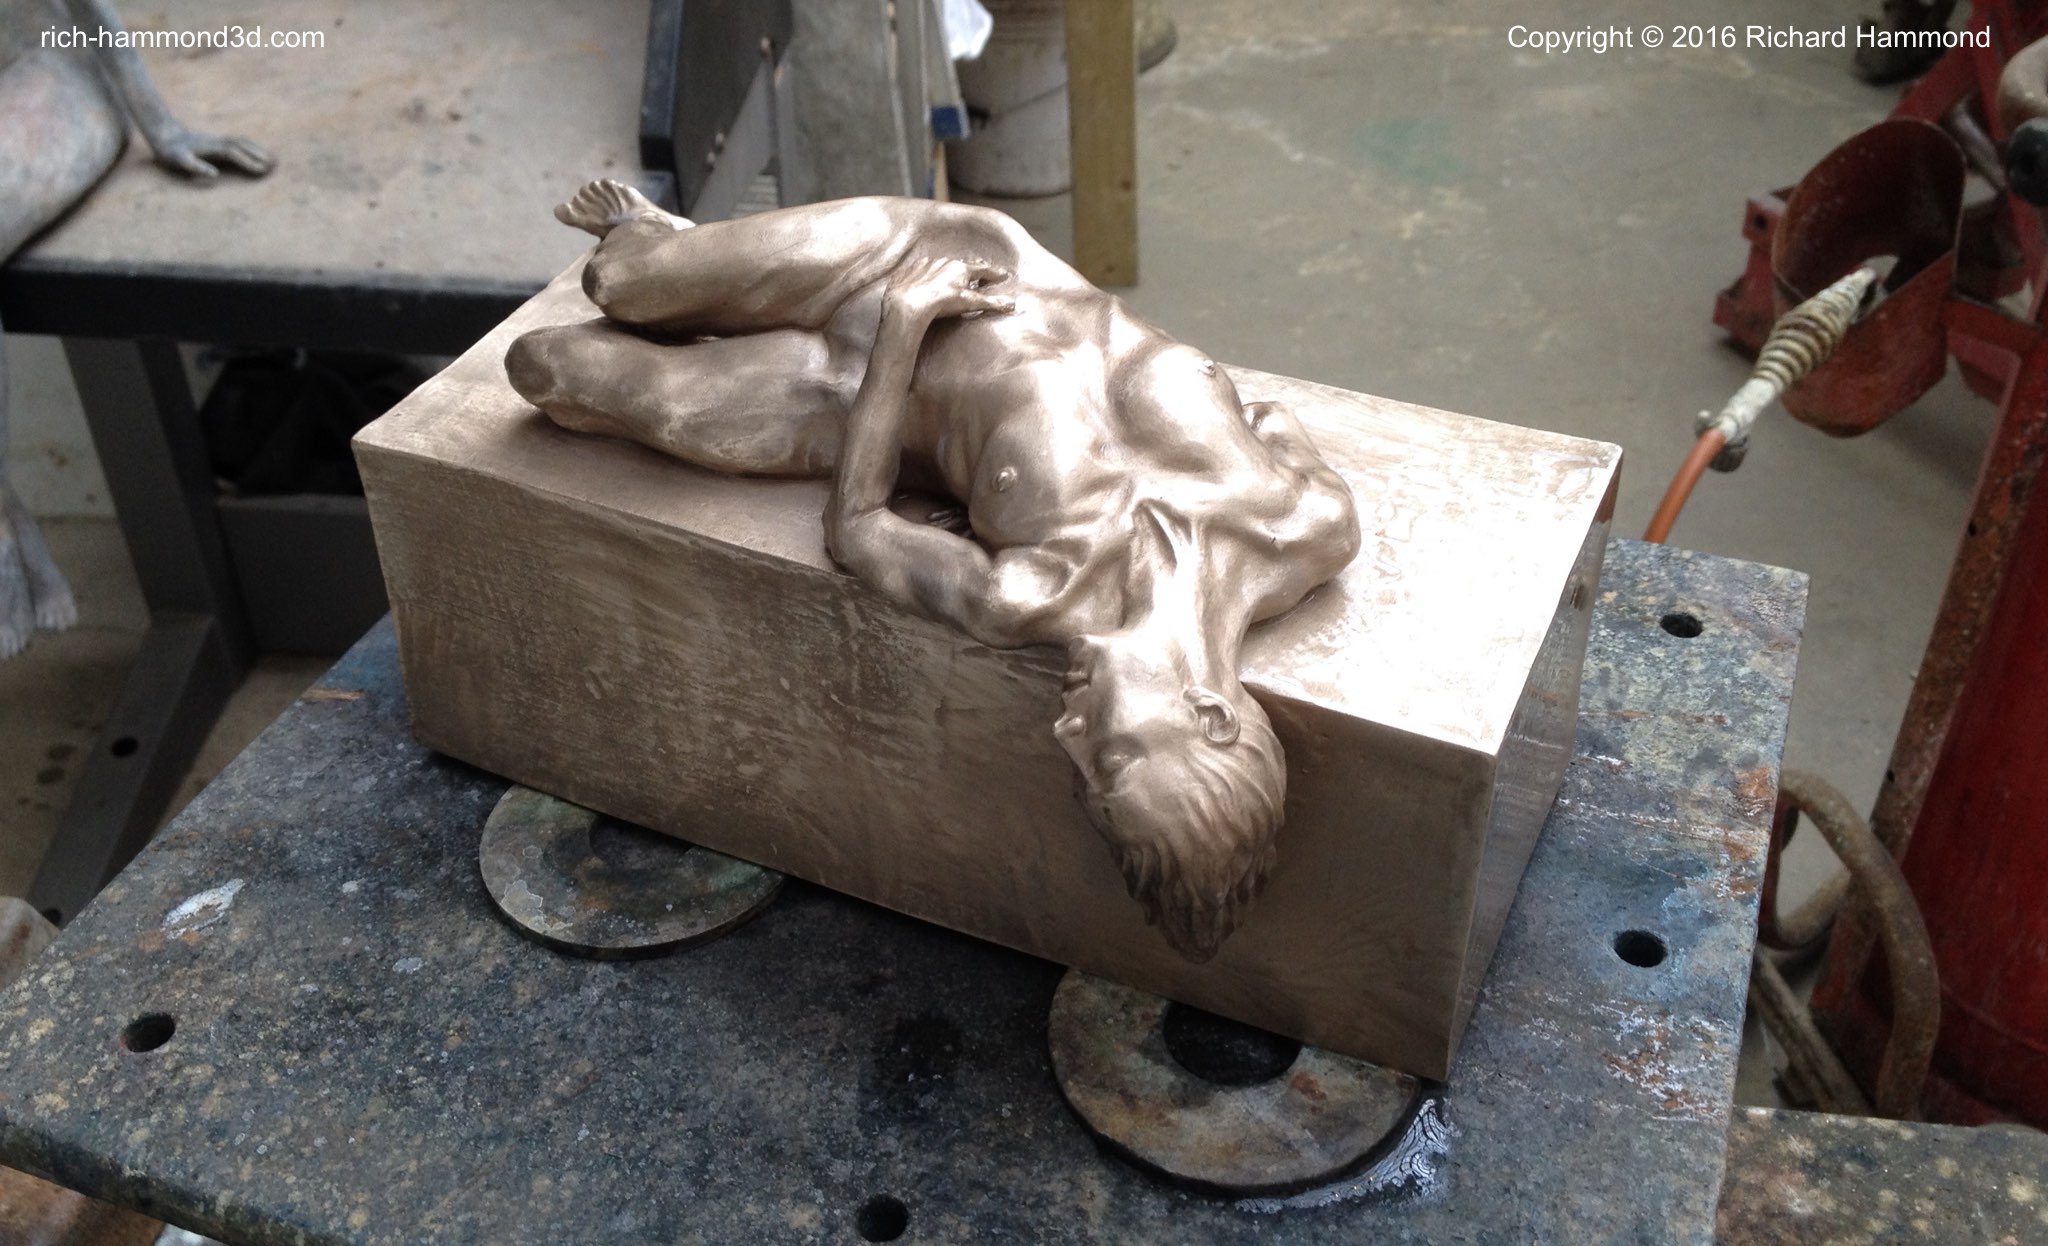 This is the raw bronze cast at the foundry just before the patination process.